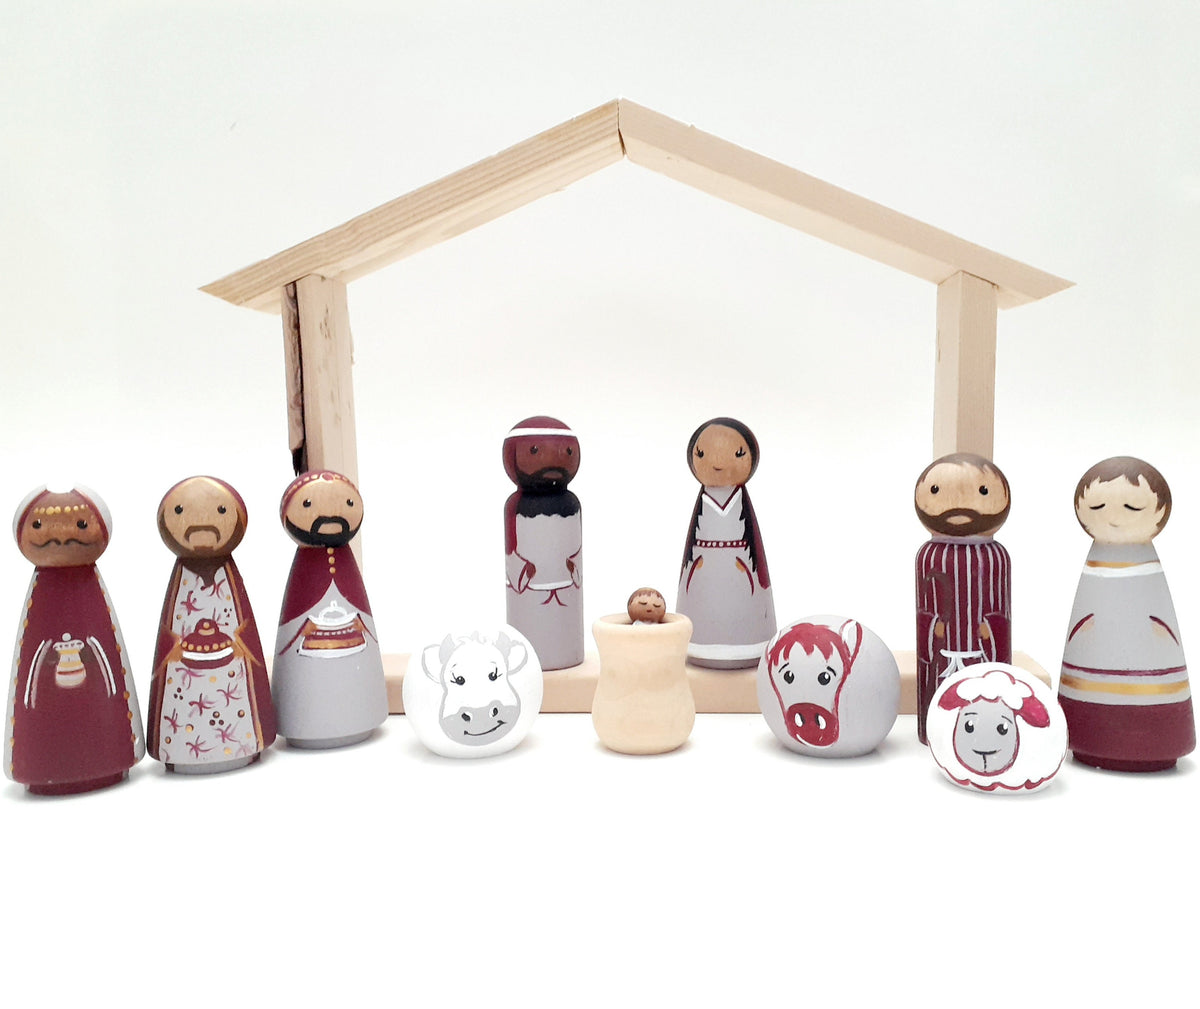 wooden peg doll nativity set in marroon, light purple and gold colors. 13 pieces